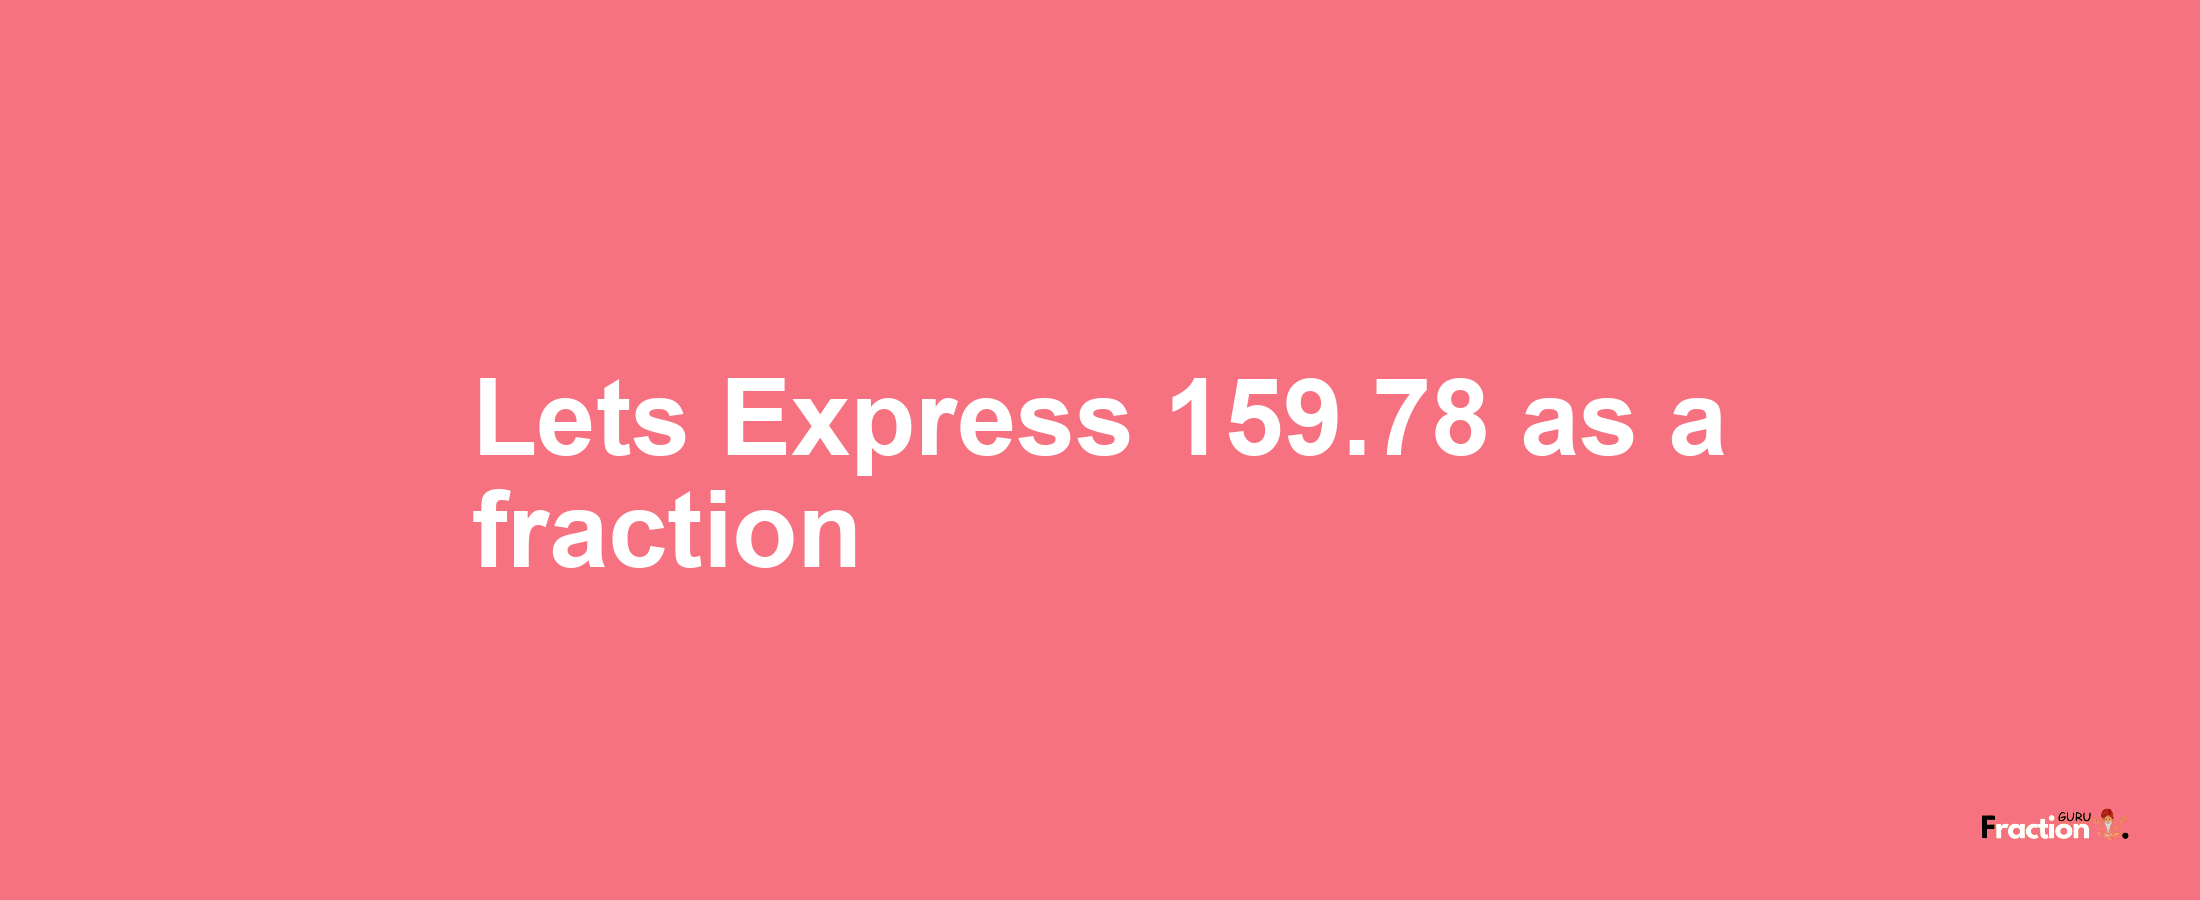 Lets Express 159.78 as afraction